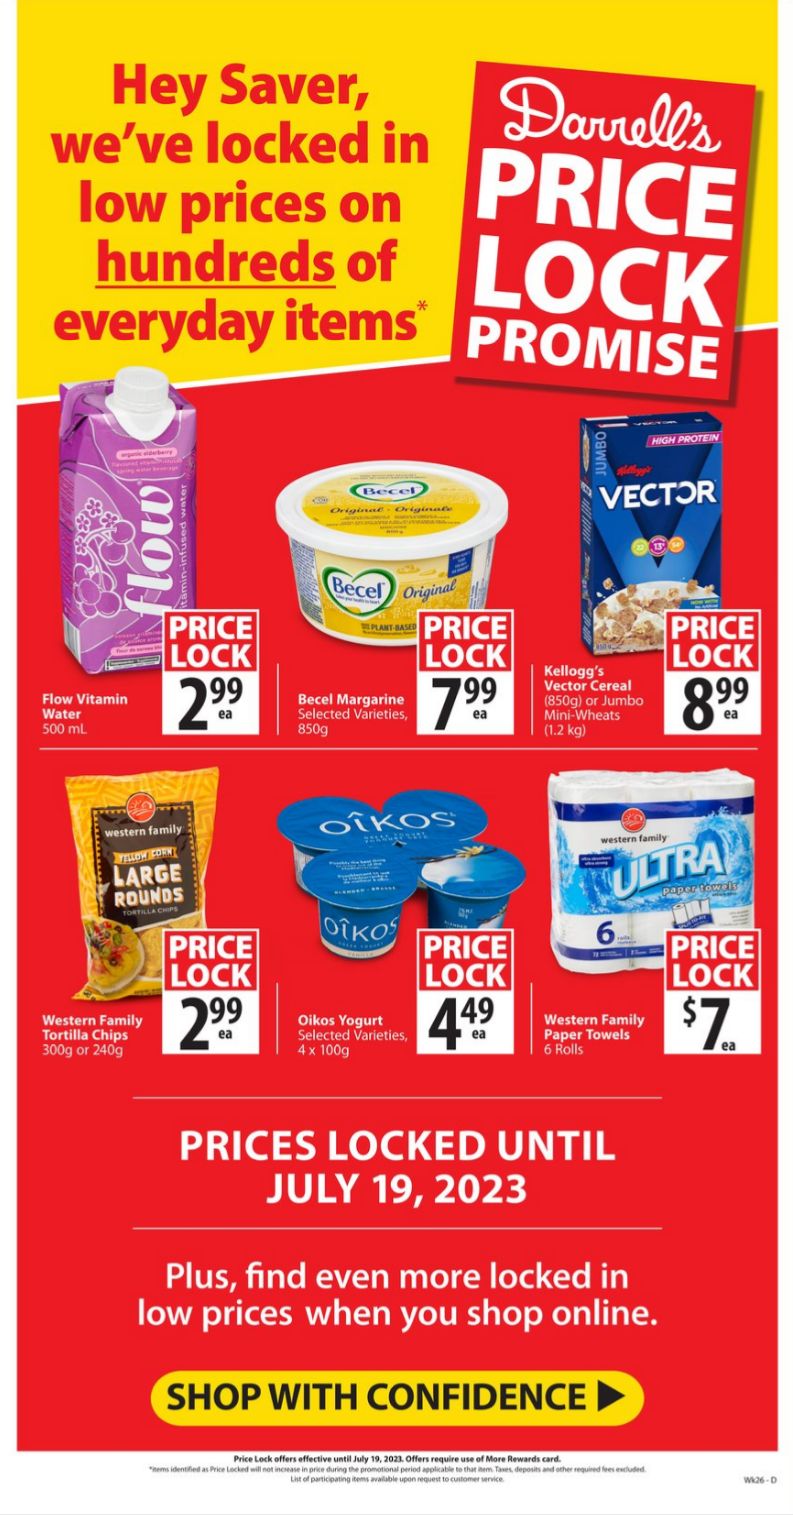 Flyer Save-On-Foods 29.06.2023 - 05.07.2023